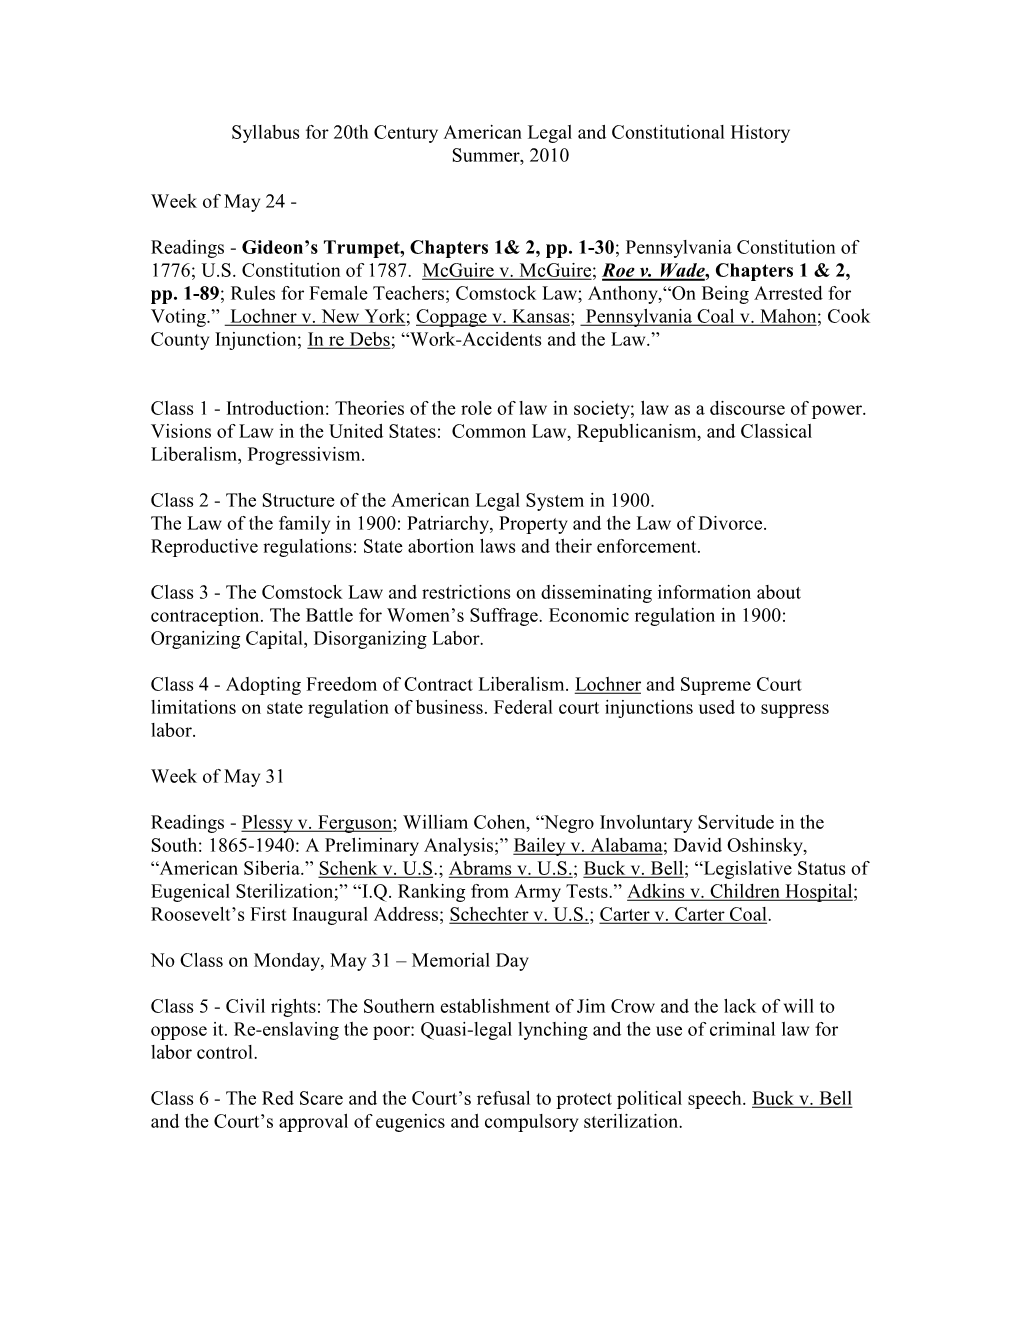 Syllabus for 20Th Century American Legal and Constitutional History Summer, 2010